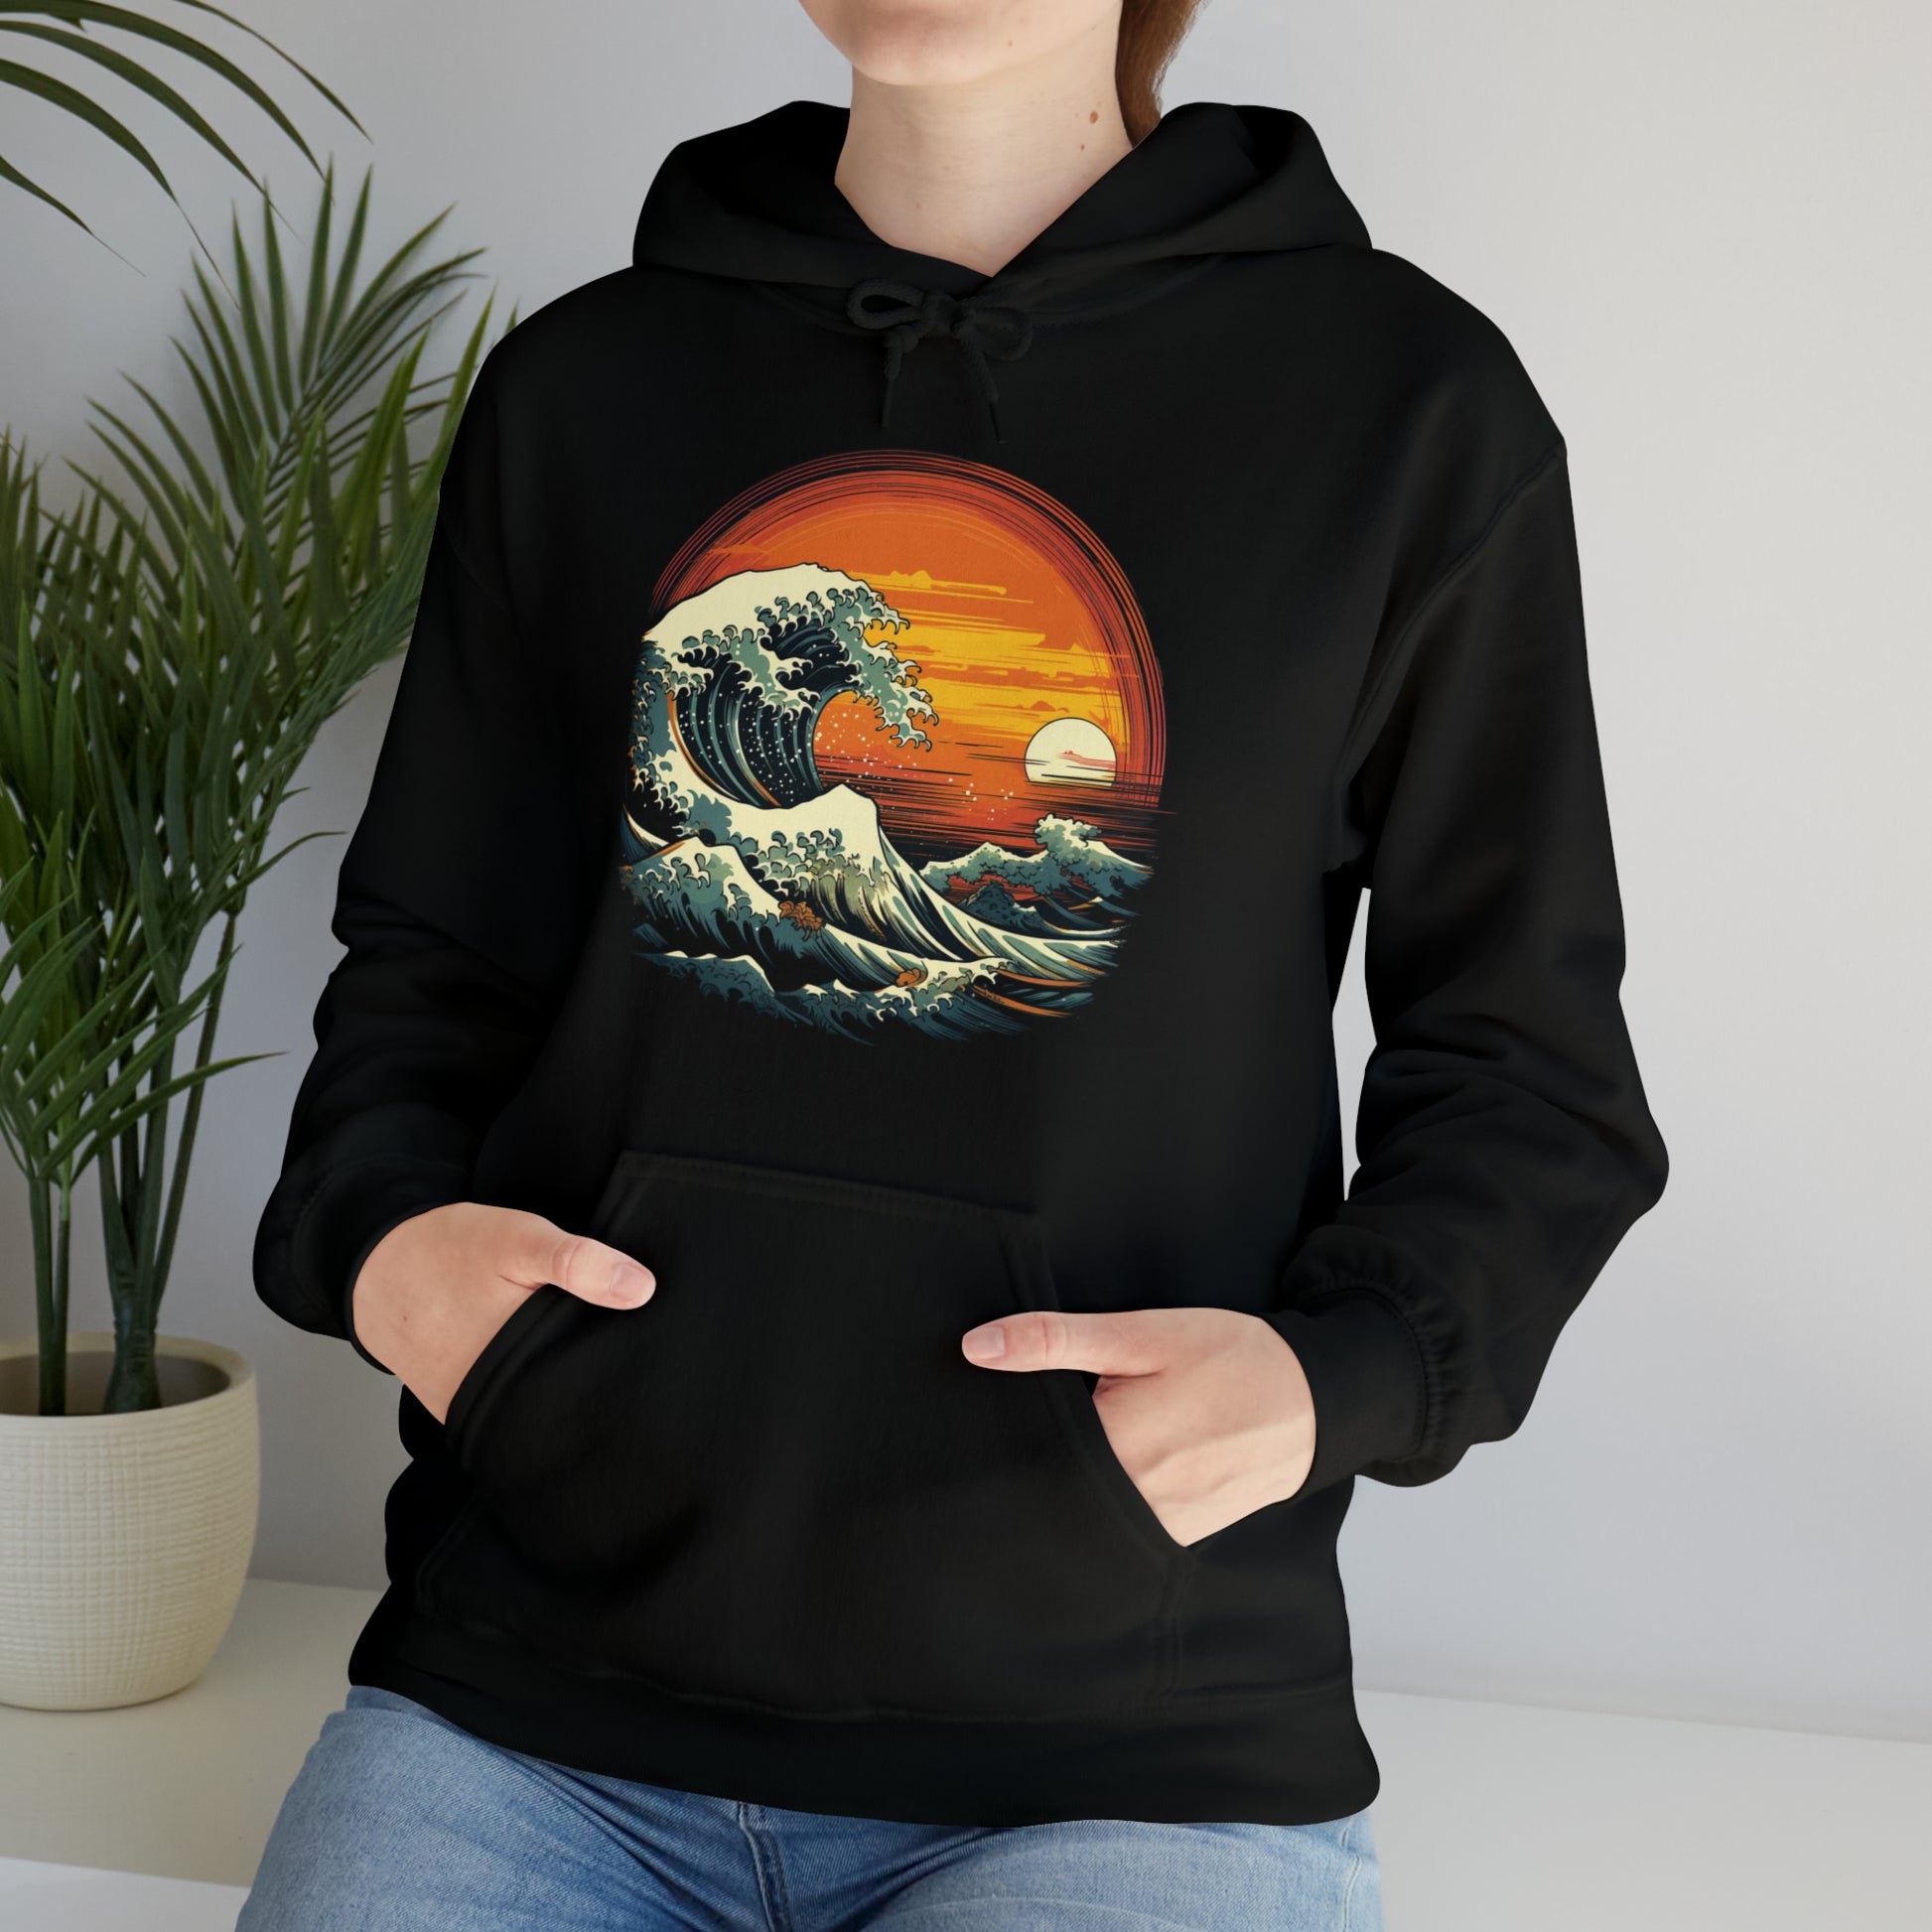 The Great Wave Hoodie, Surf Ocean Sea Japanese Pullover Men Women Adult Aesthetic Graphic Cotton Hooded Sweatshirt Pockets Starcove Fashion